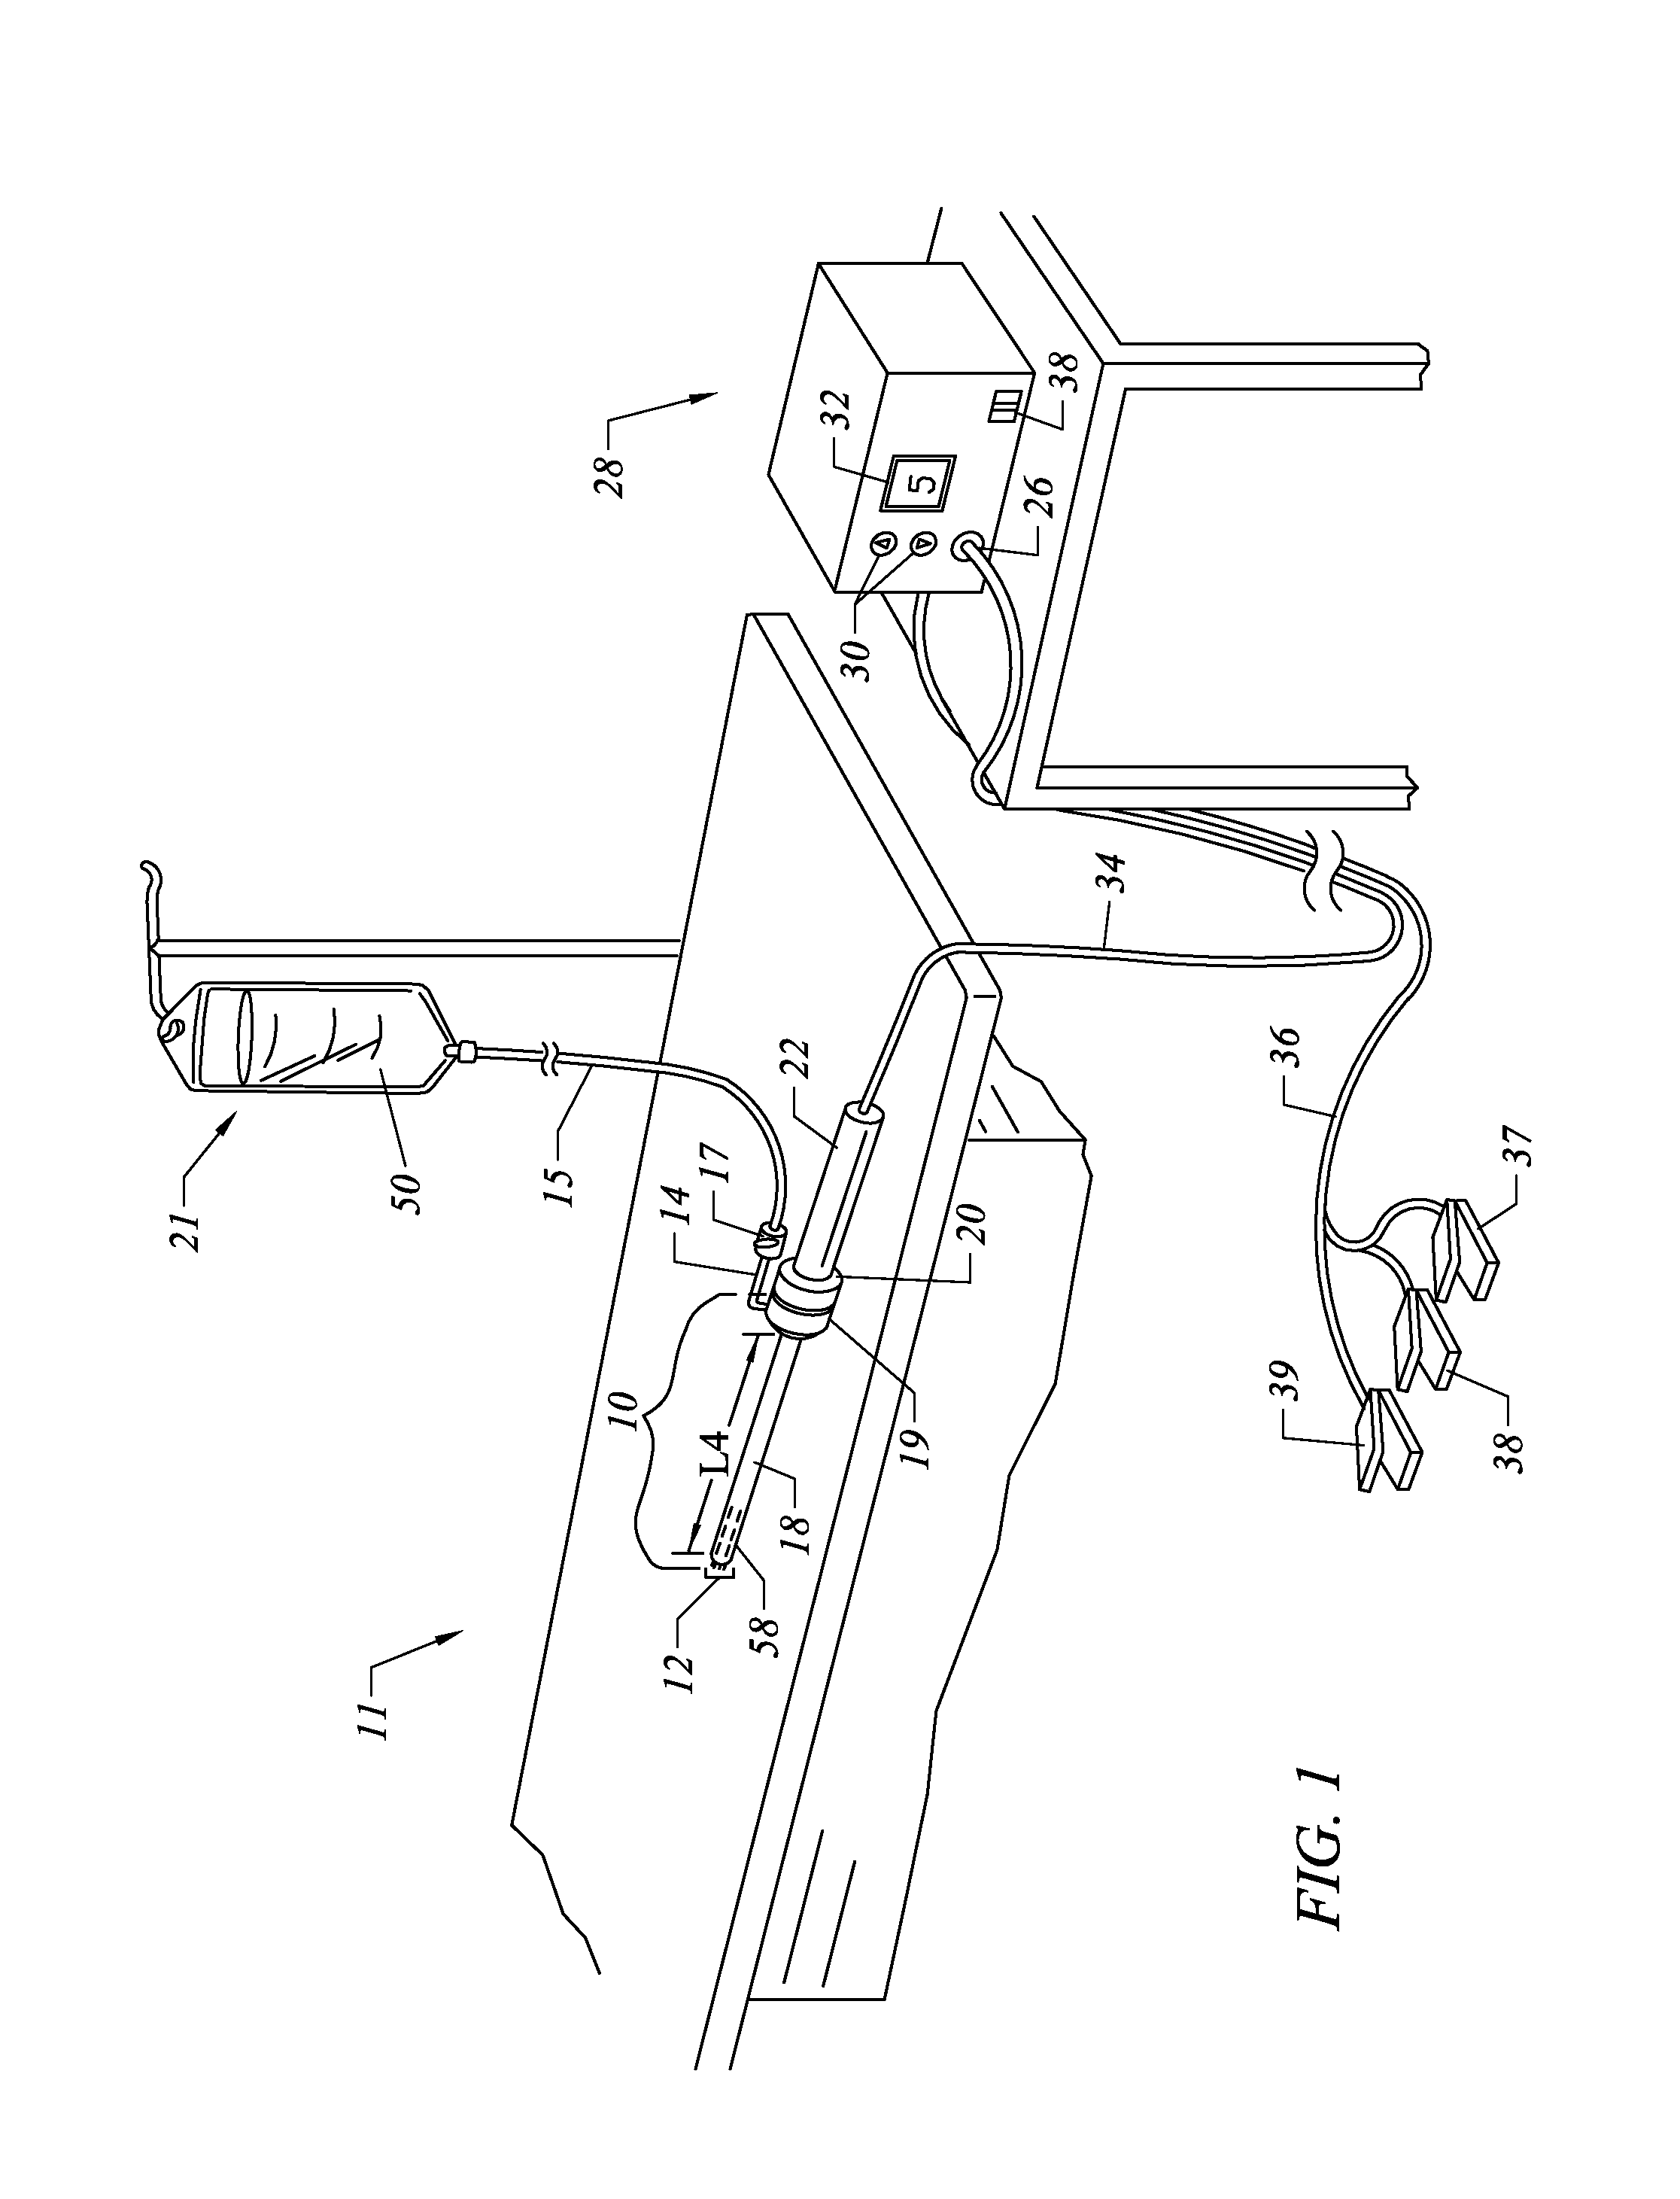 Methods for targeted electrosurgery on contained herniated discs